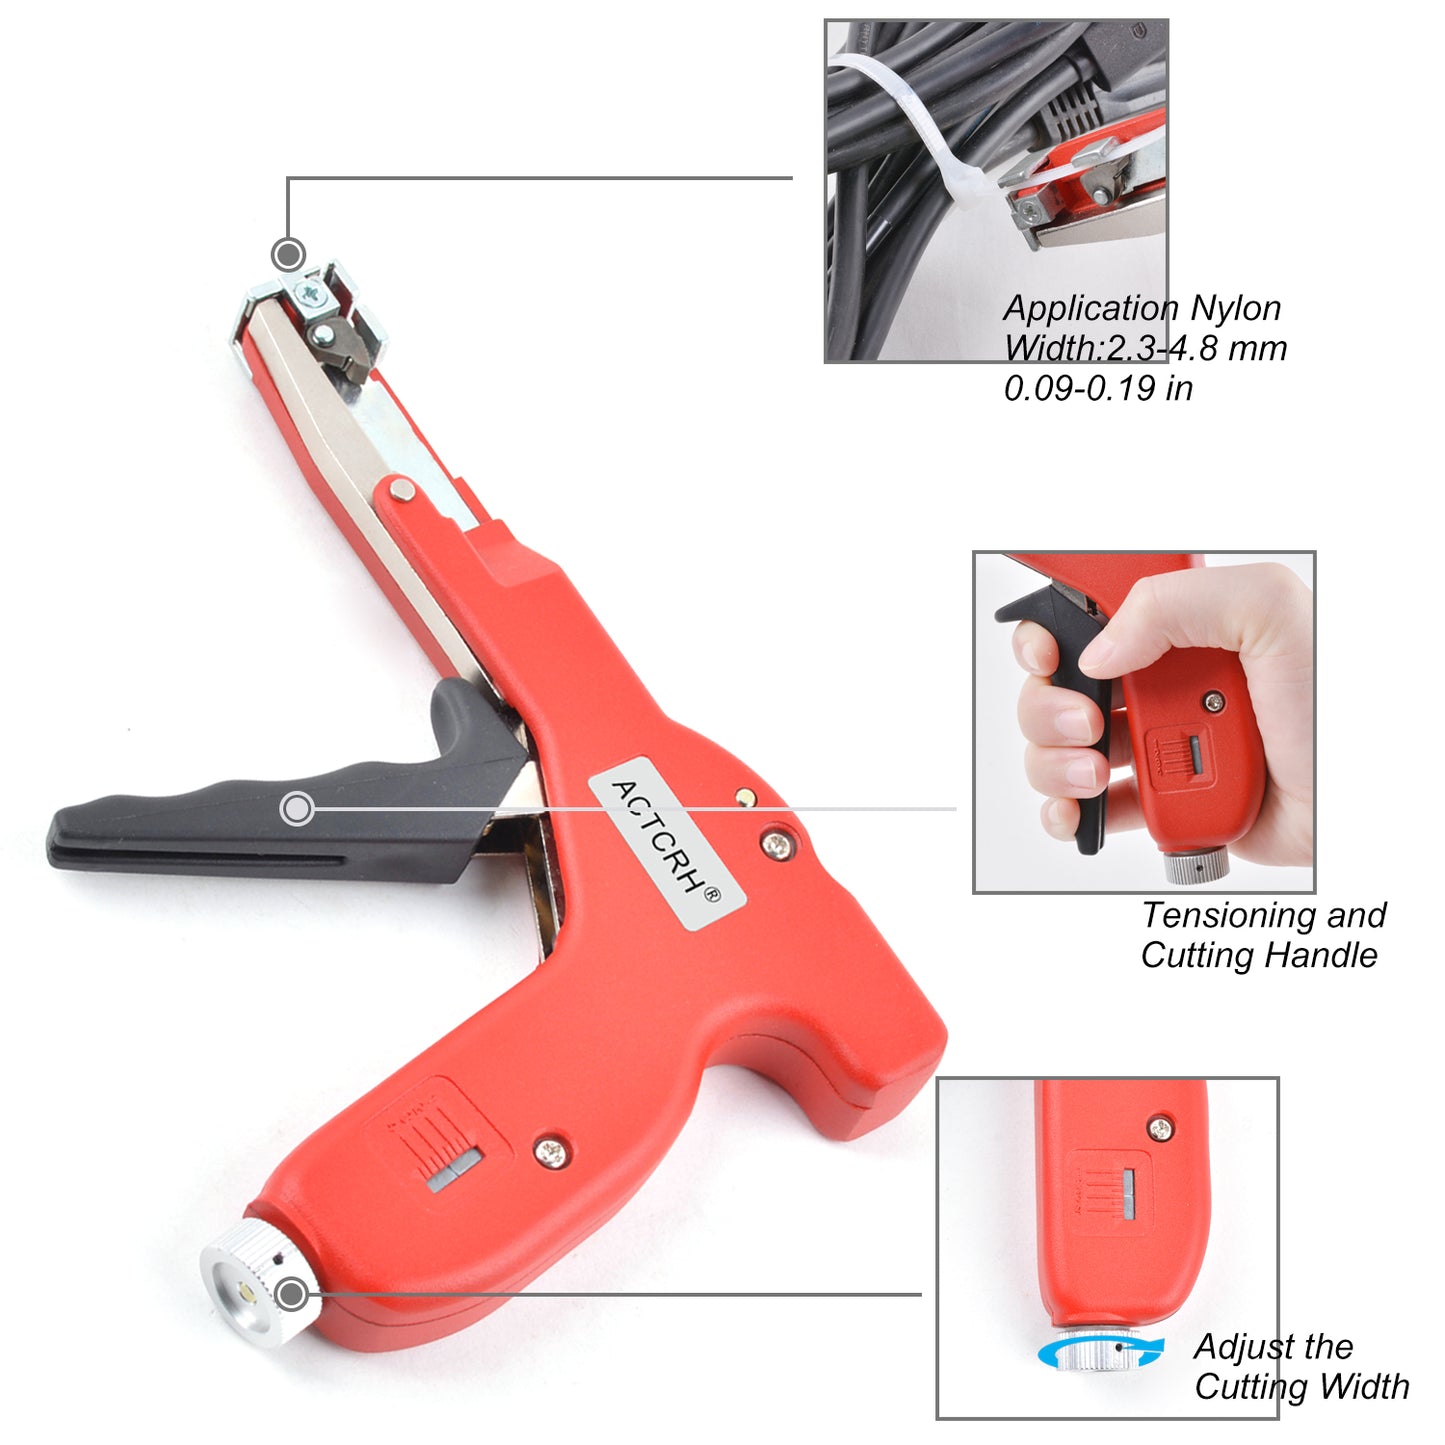 ACTCRH ACT-CT11N Cable Tie Gun for Wire Harness and Cable Bundle, Fastening and Cutting Plastic Nylon Cable Ties, Red Version